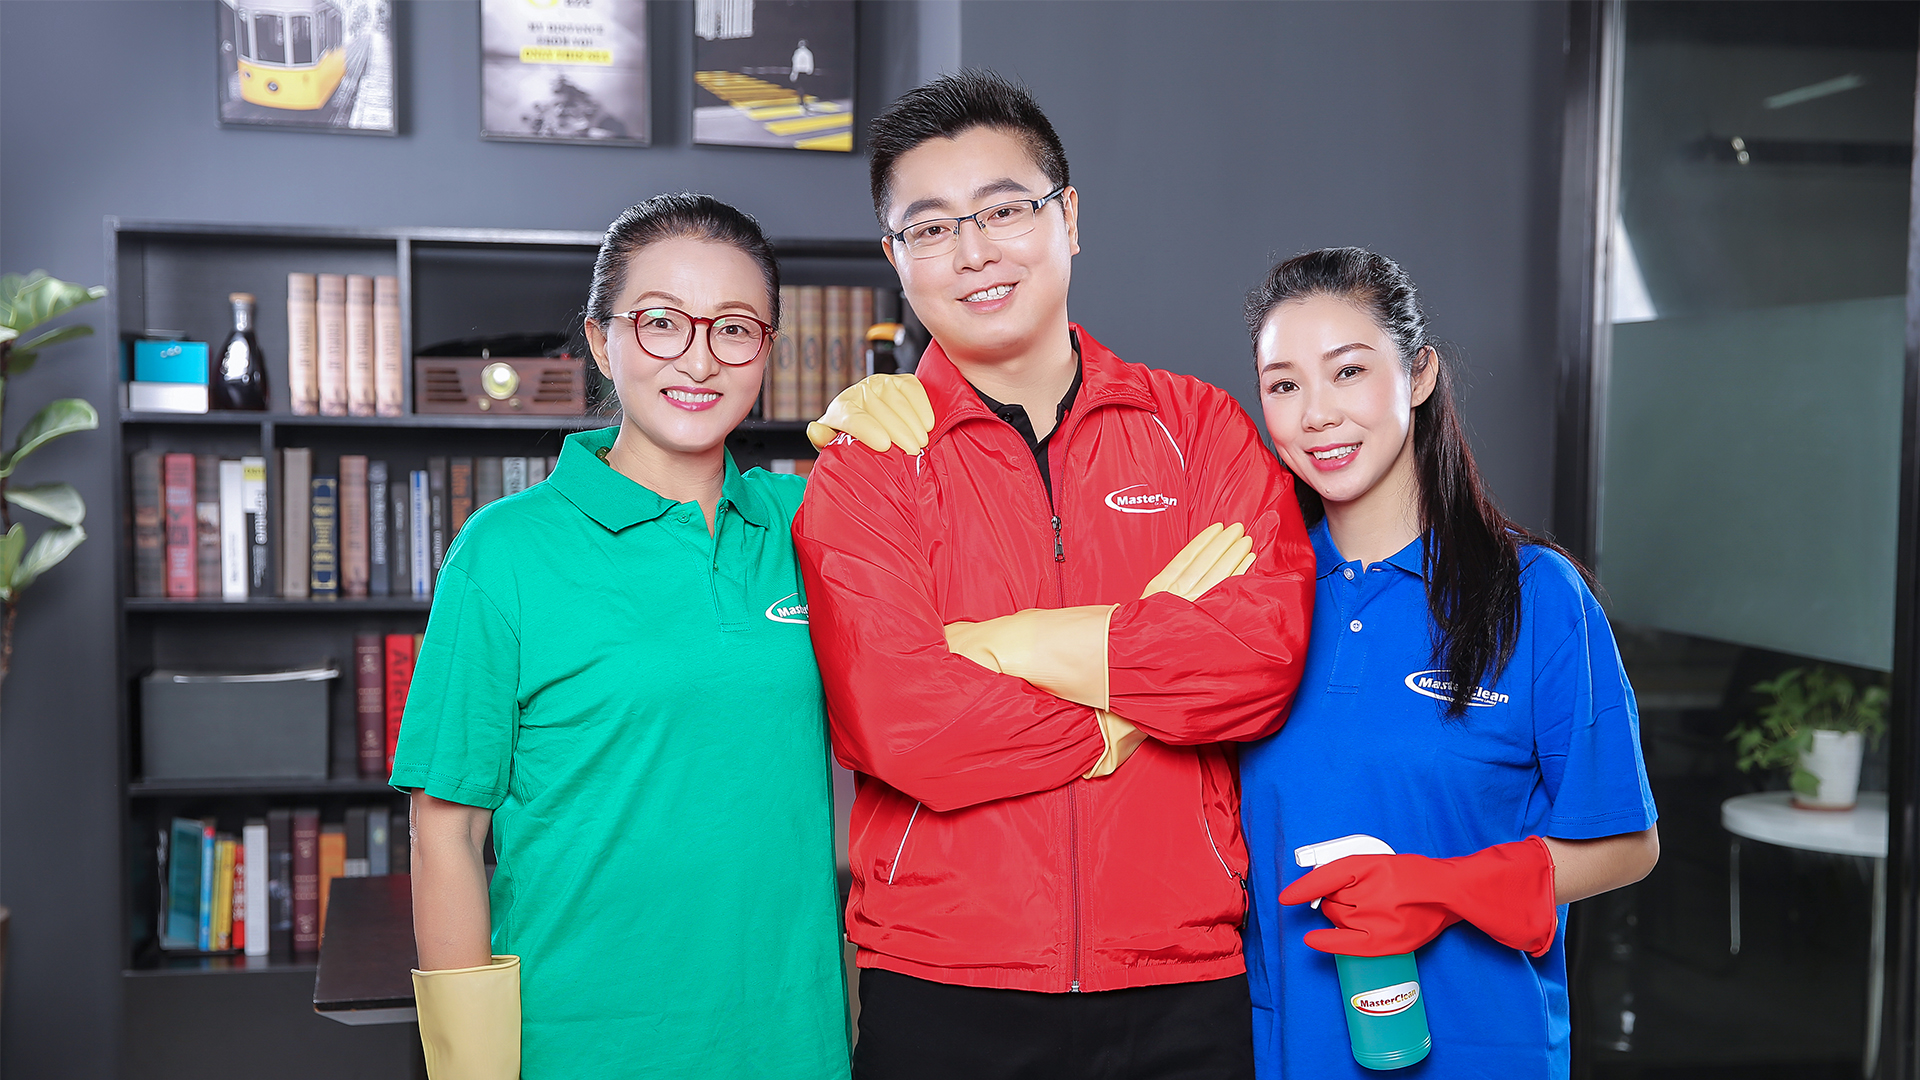 It is a Brand and Service Shooting for Hong Kong Cleaning company by D2 Studio Branding Agency Brand Identity and Design Hong Kong and Guangzhou China who does Brand and Service Shooting. 9